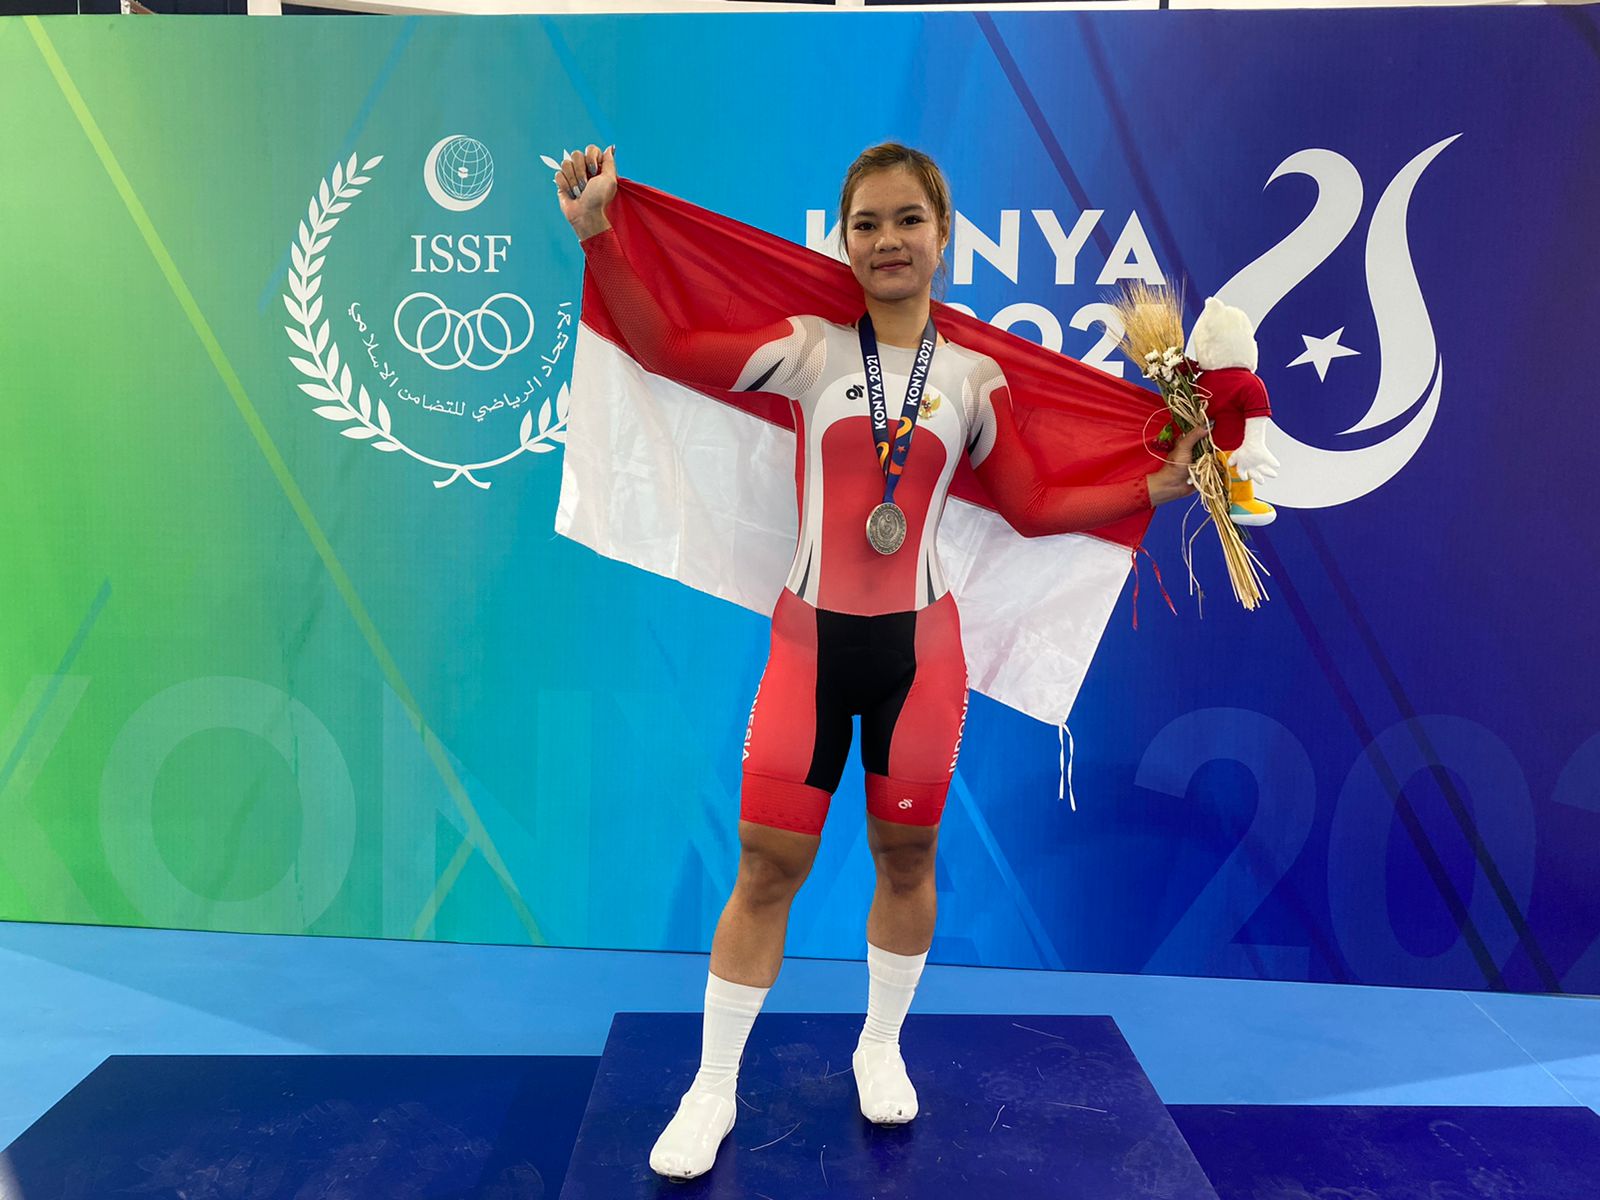 Tim Indonesia Bagged Two Medals To Start ISG Campaign - Indonesia Olympic Commitee